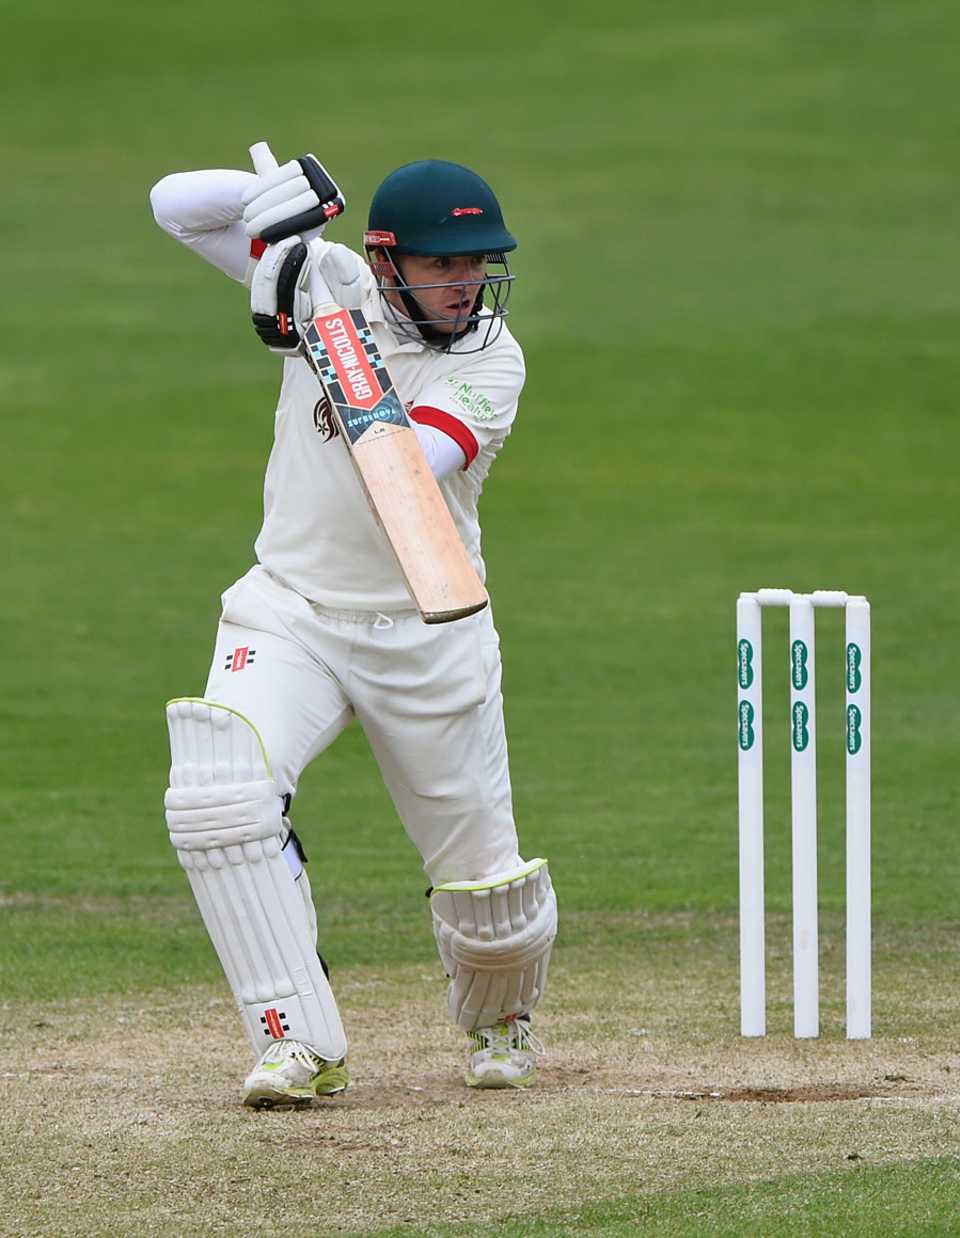 Niall O'Brien's 93 enable Leicestershire close in on Glamorgan's score